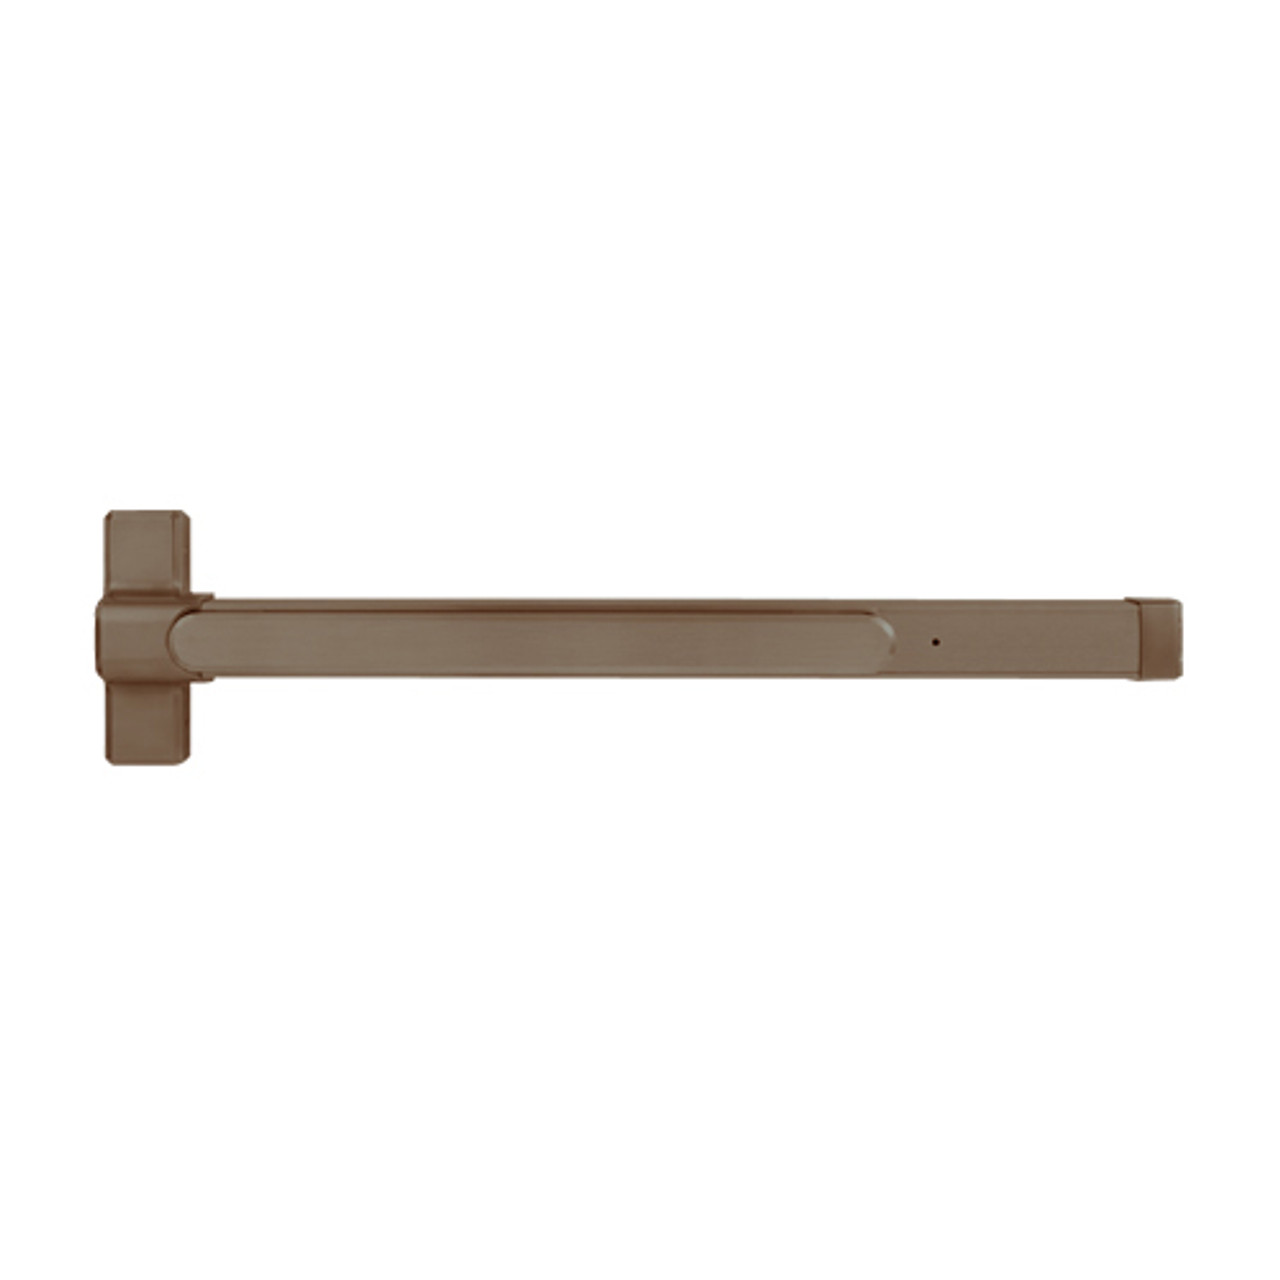 QED119X-48-7-313AN Stanley QED100 Series Heavy Duty Surface Vertical Rod Fire Rated Exit Device in Anodized Duranodic Bronze Finish